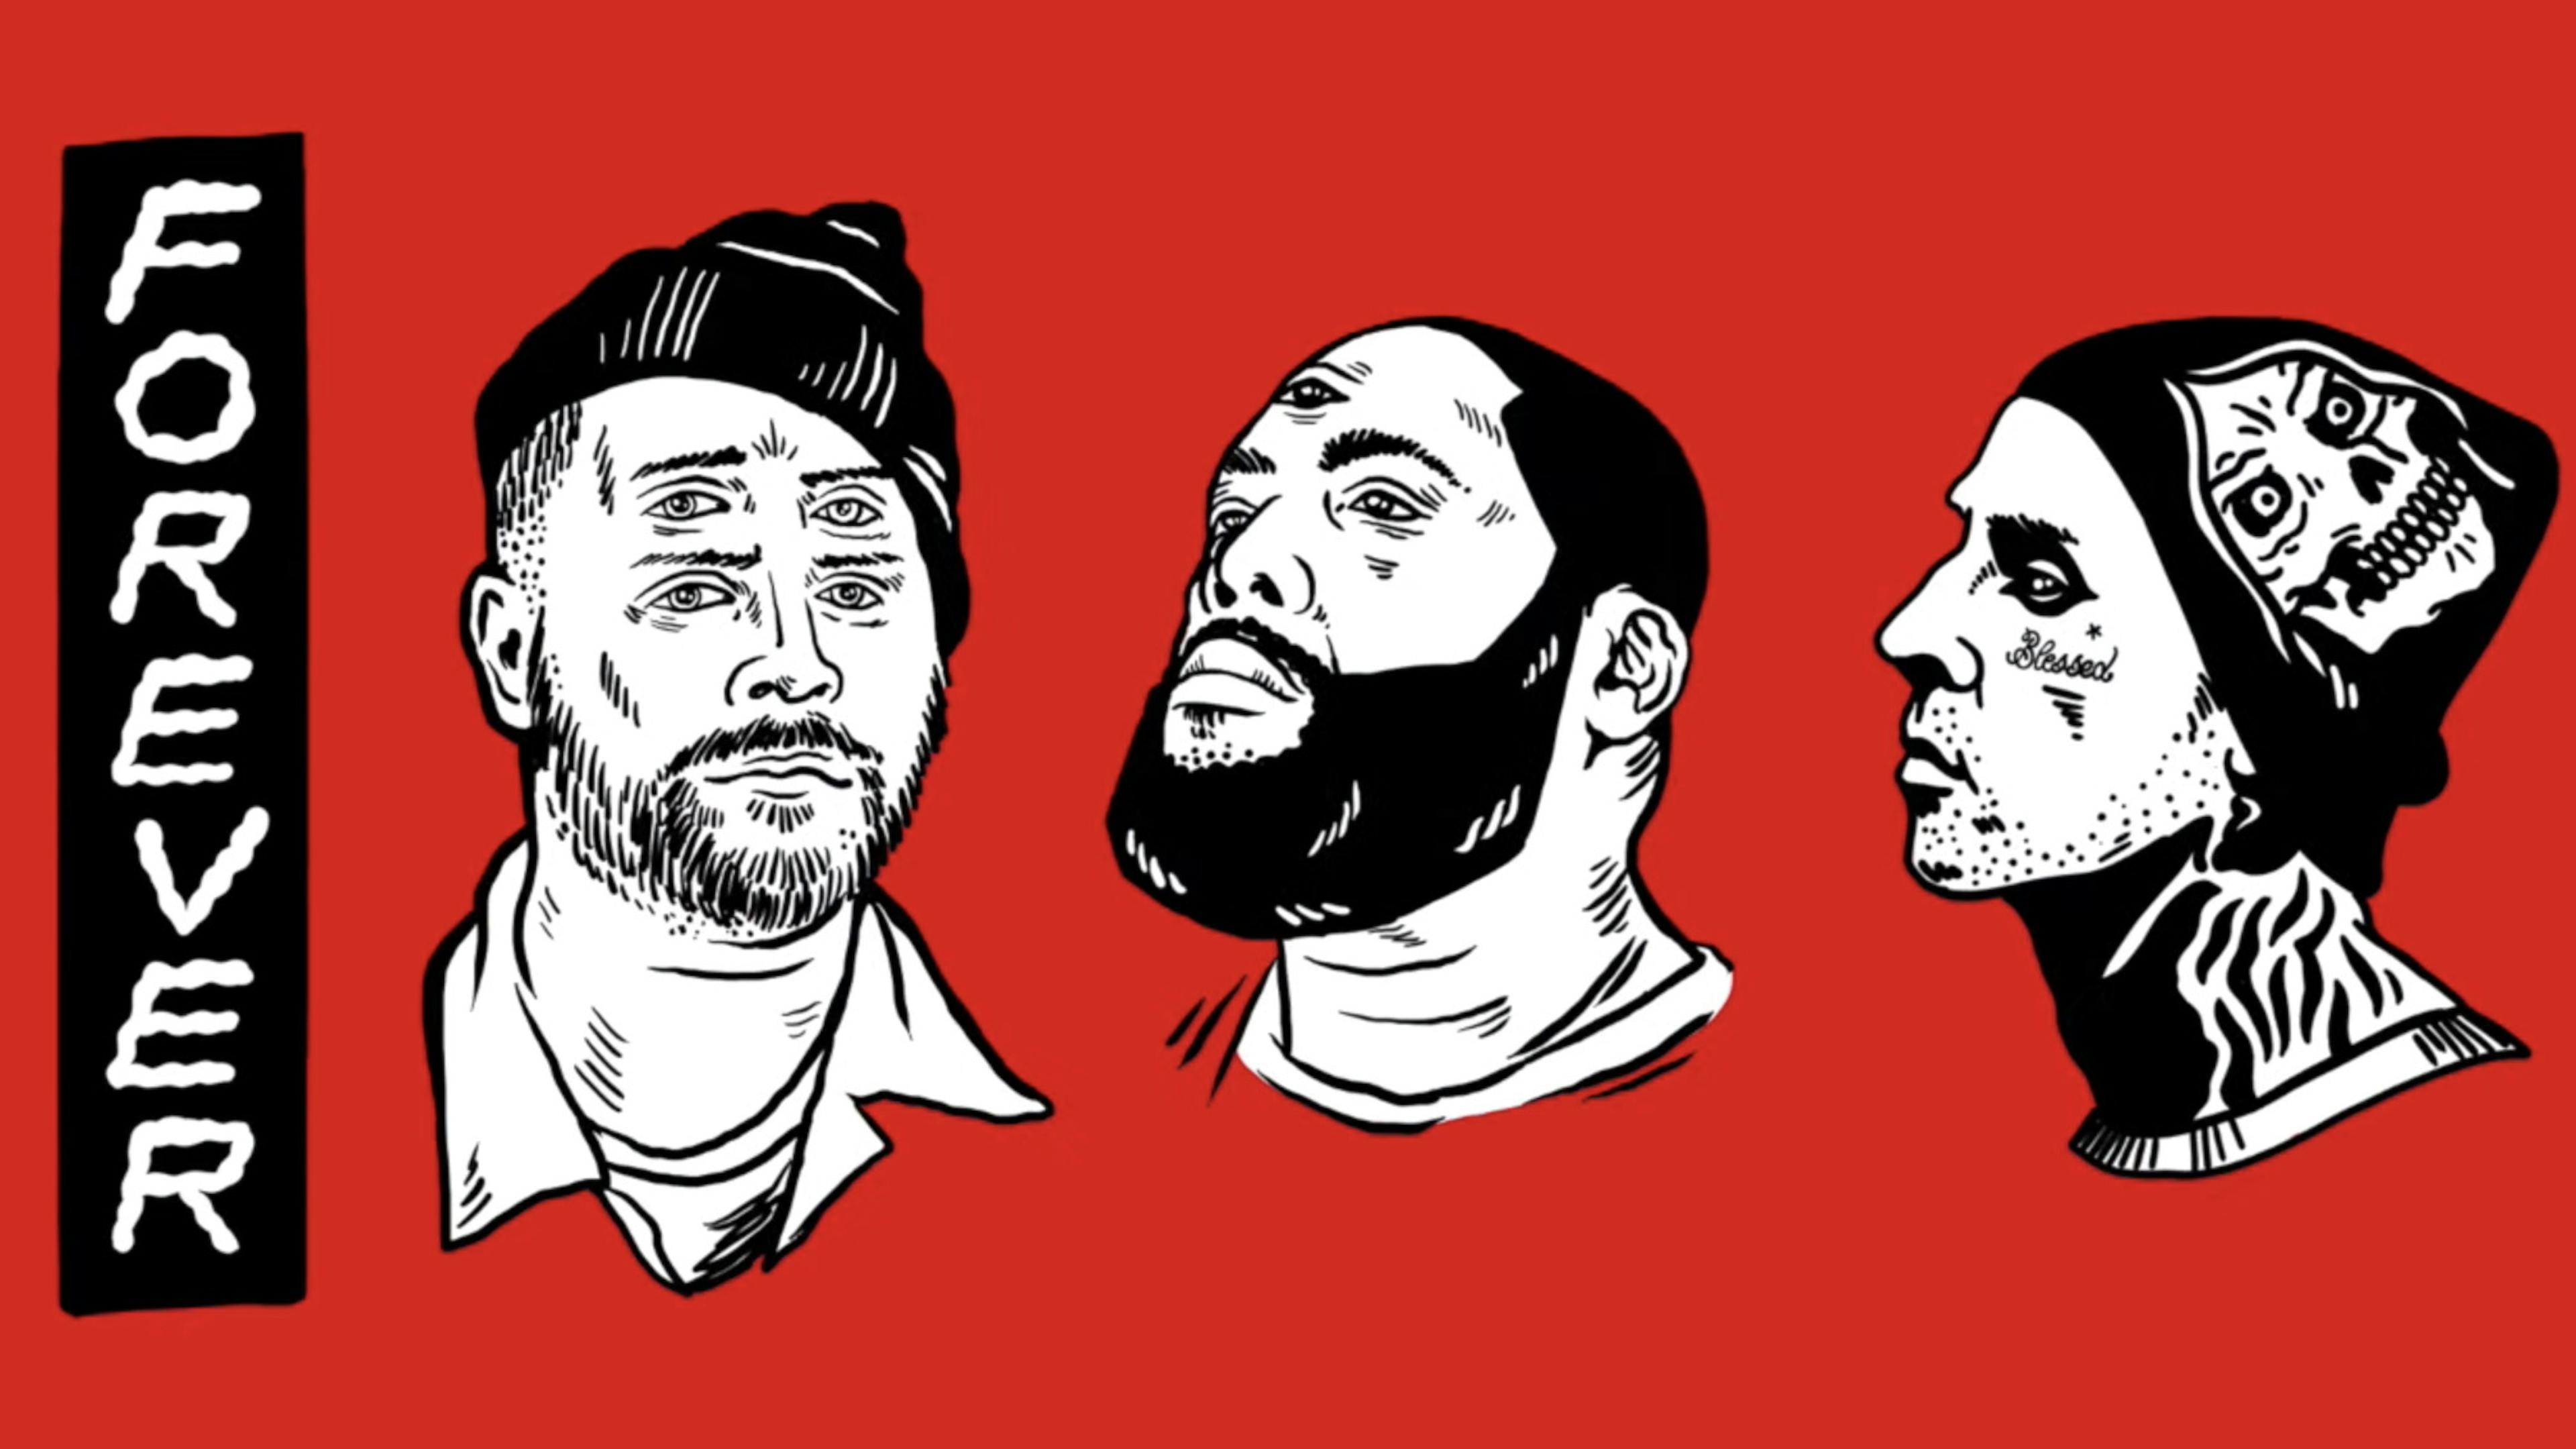 Travis Barker And Run The Jewels Collaborate For New Single, Forever